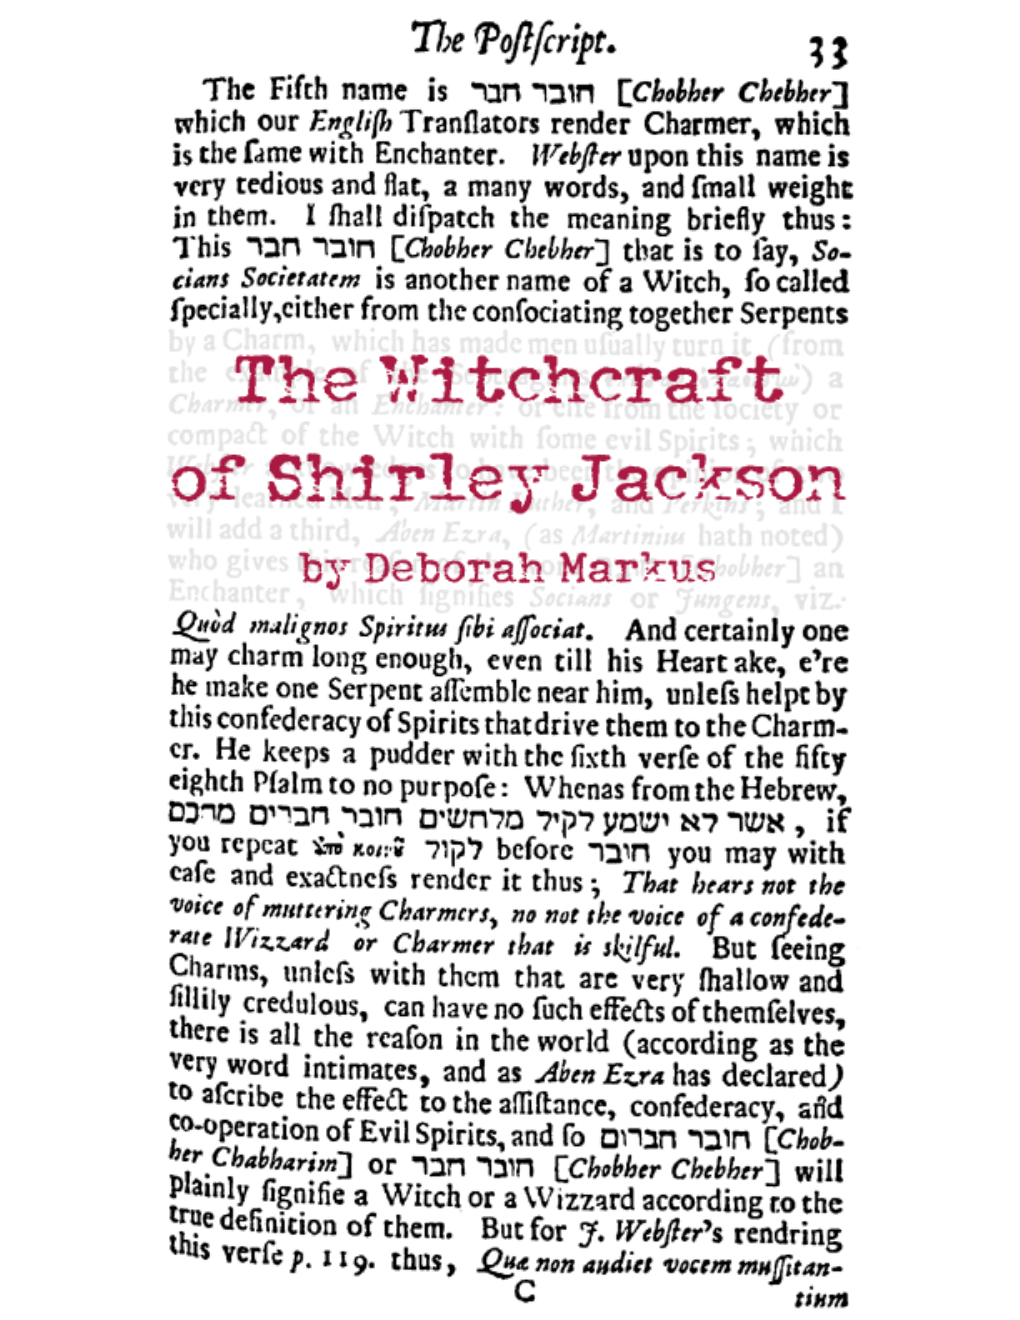 The Witchcraft of Shirley Jackson